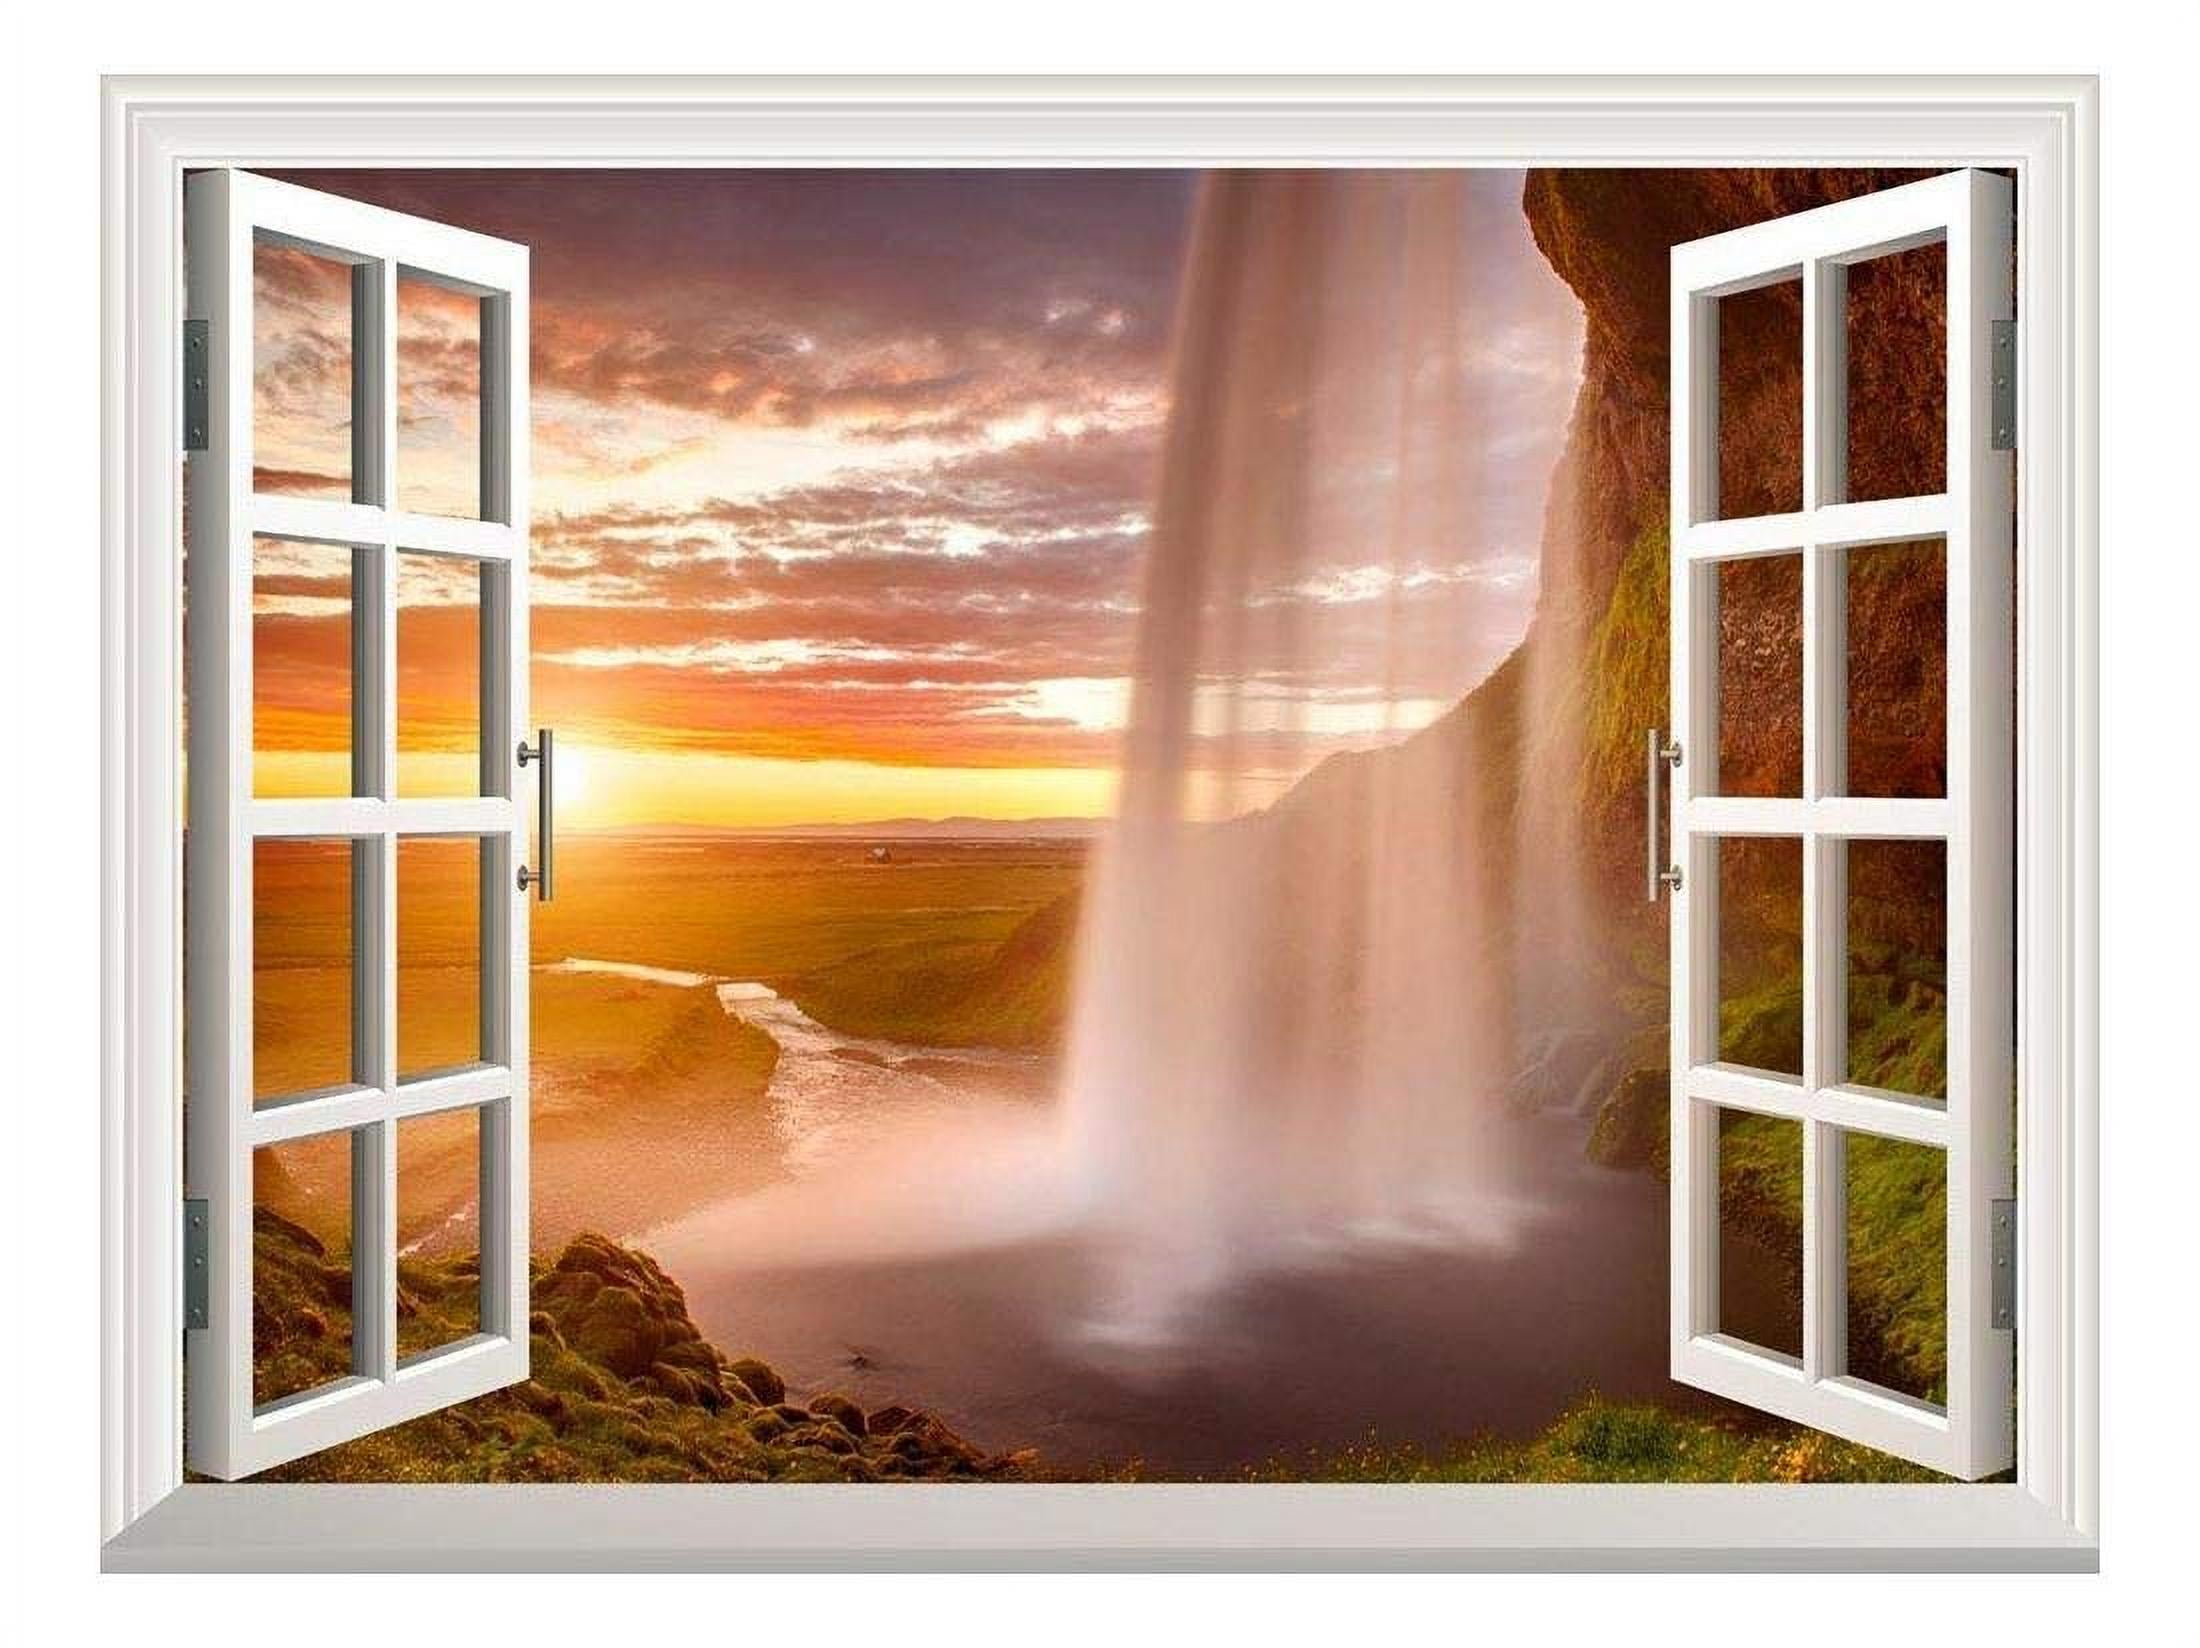 Wall Mural 24"x32" Majestic Seascape at SunsetWindow View Wall Decor 